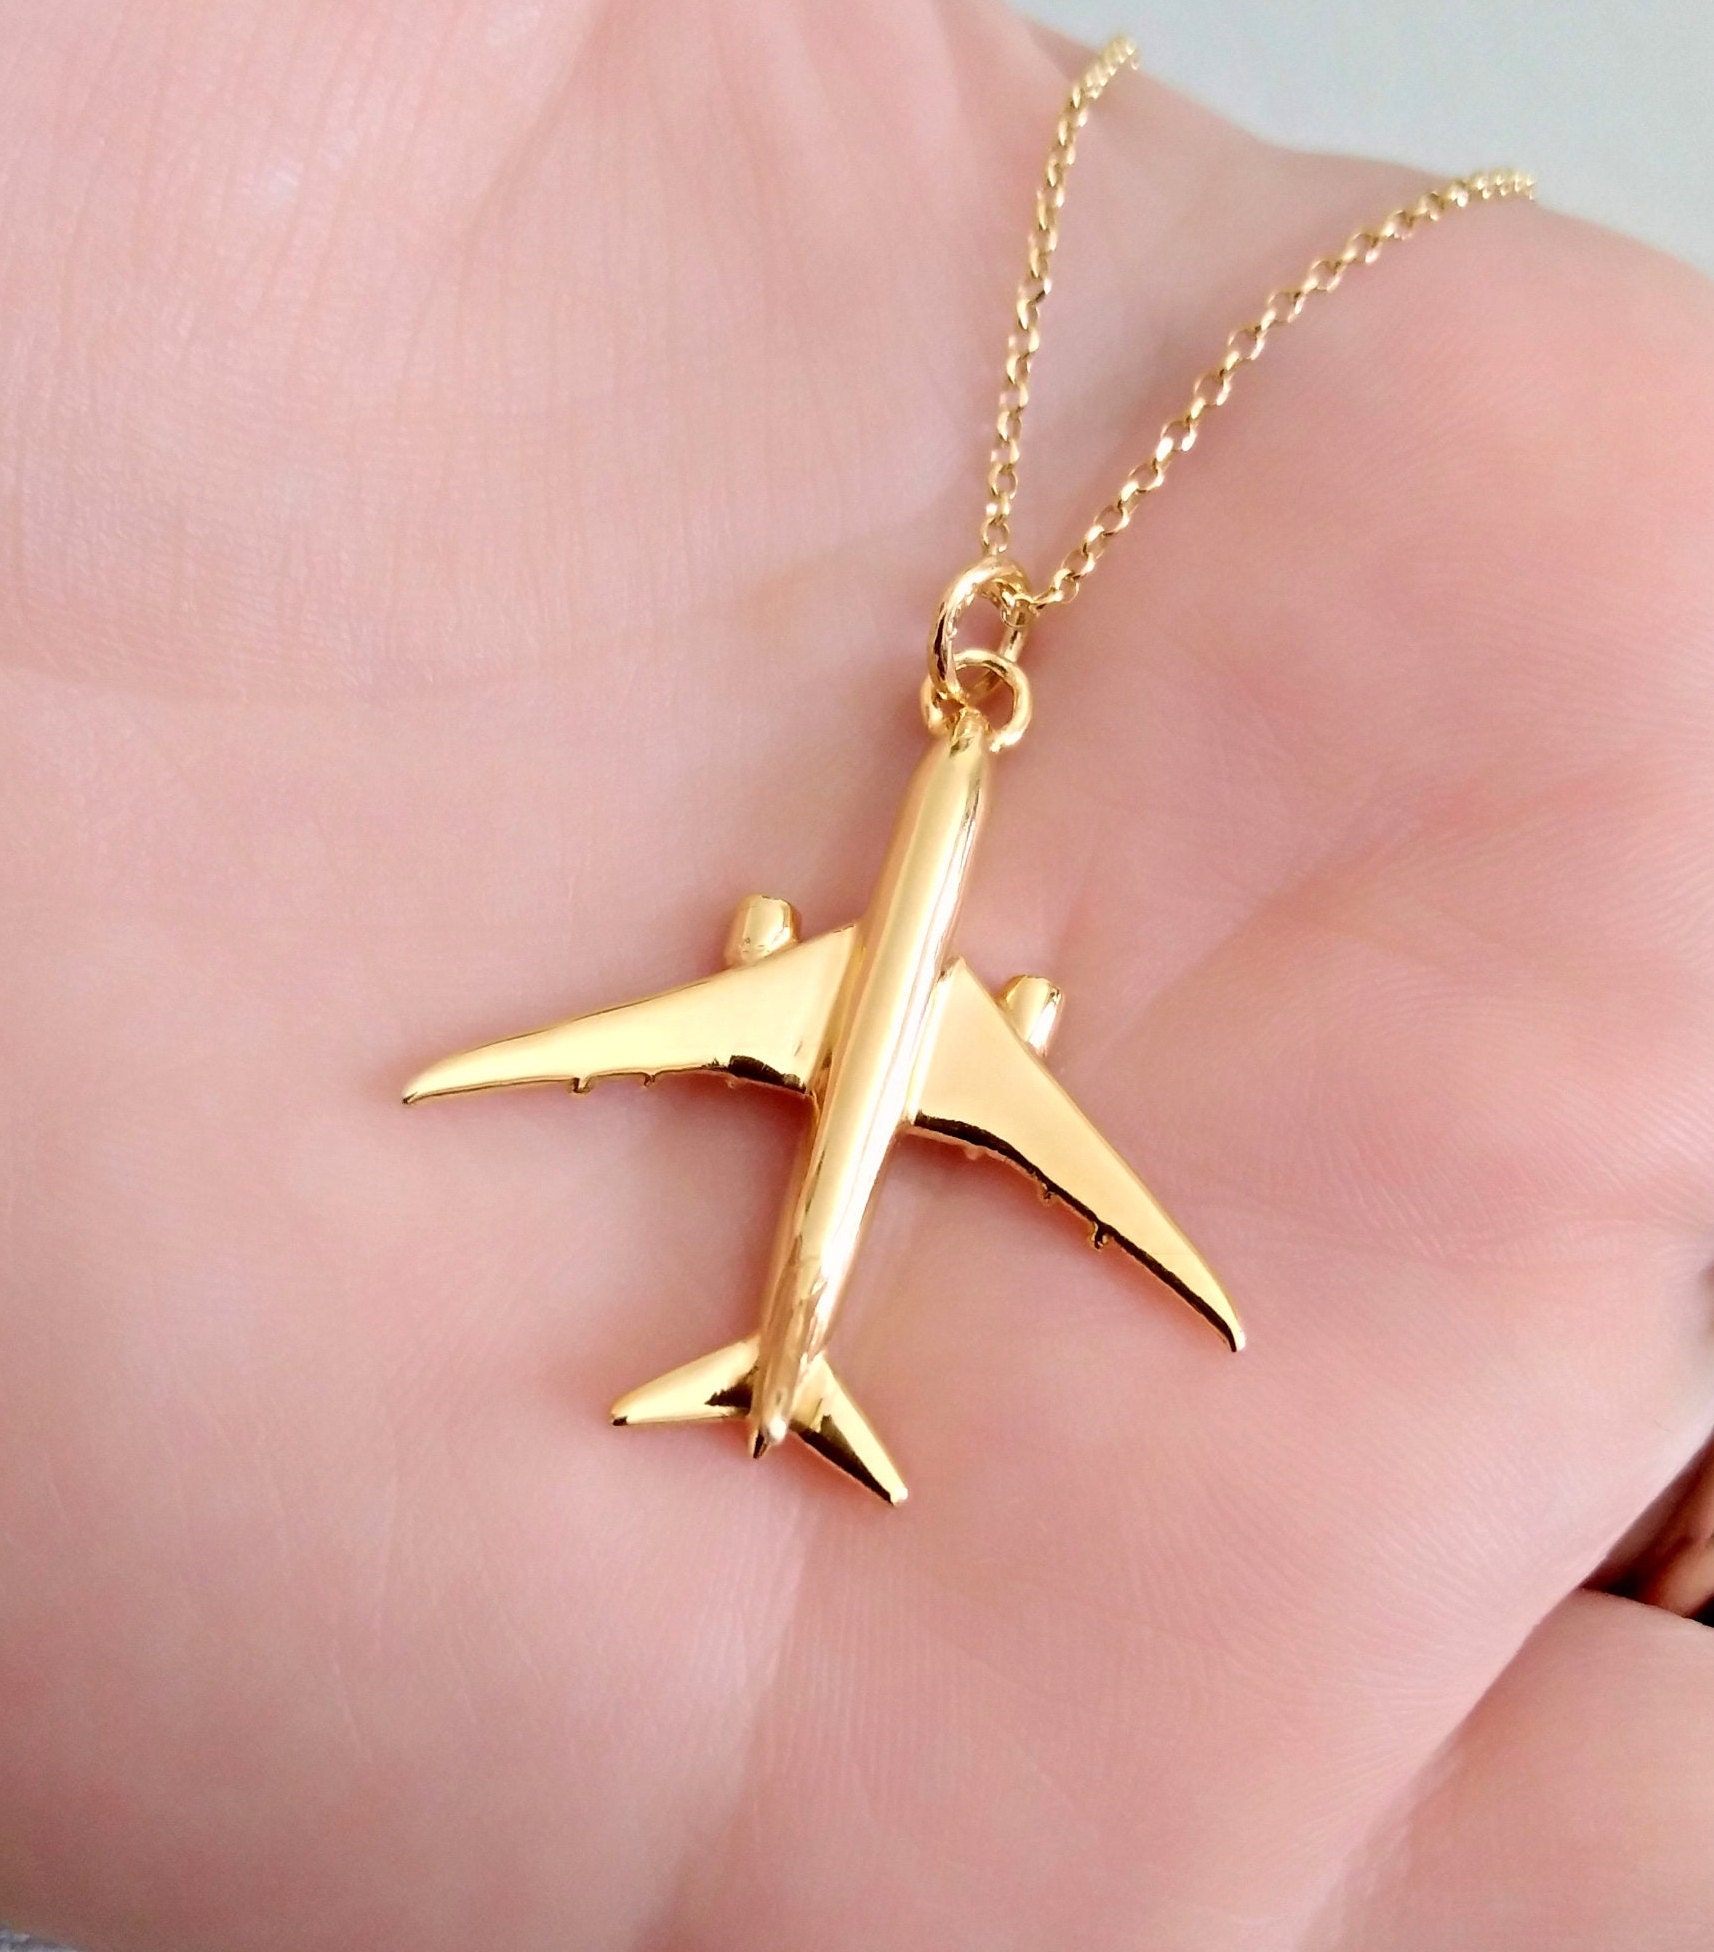 Gold Layering Necklace with Airplane and Earth Charms - Amelia Aviation